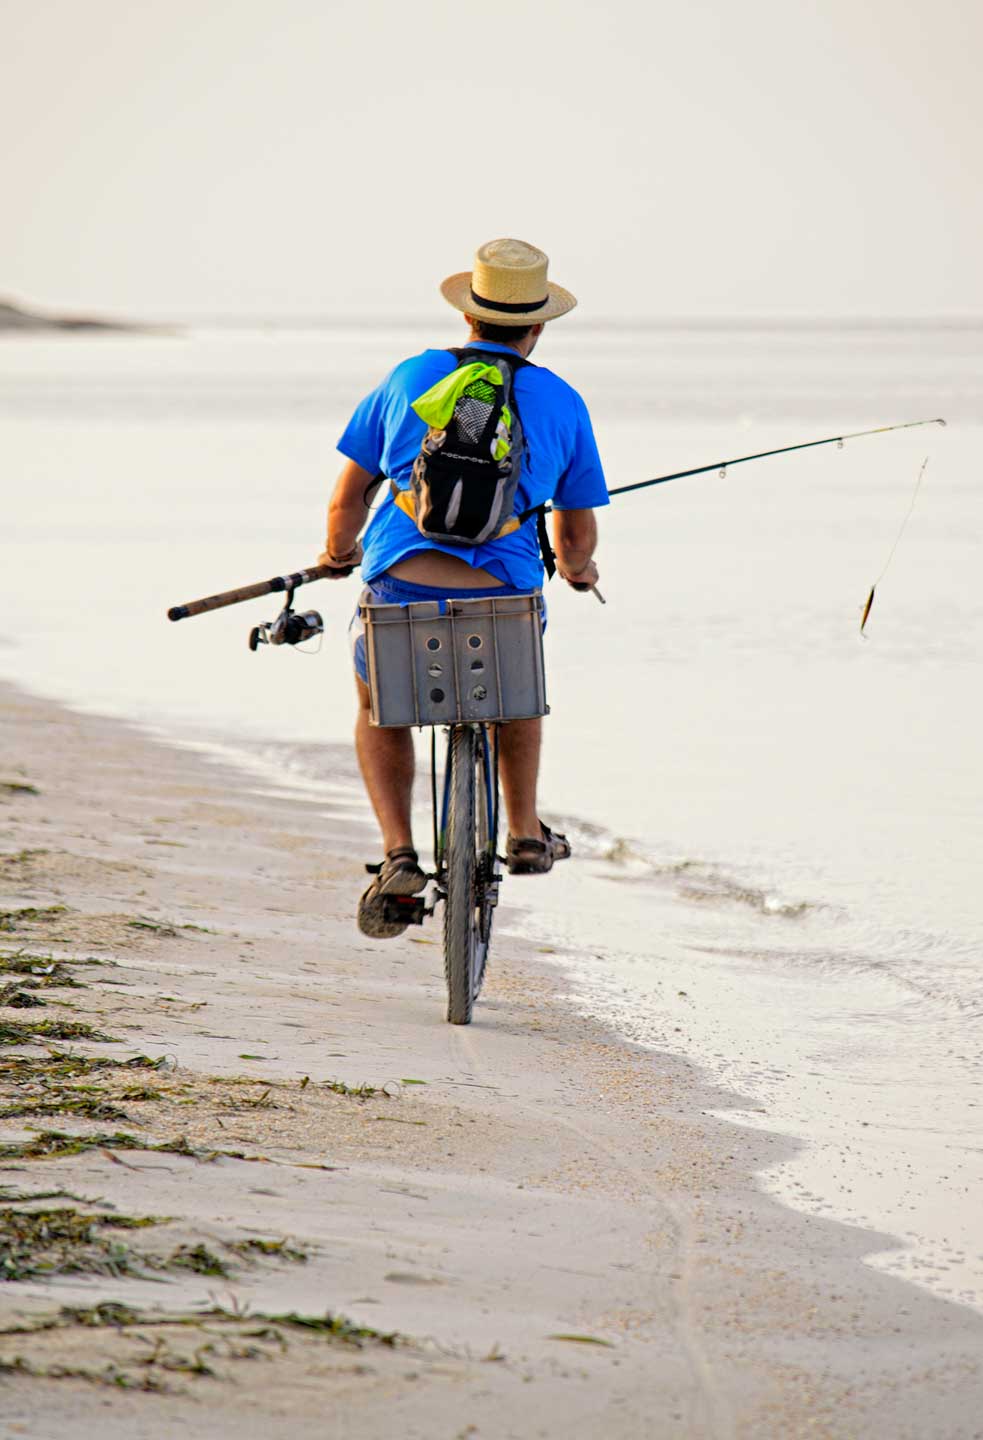 CJPOTY July 2023 shortlisted image for the Summer theme - cycling with a fishing rod